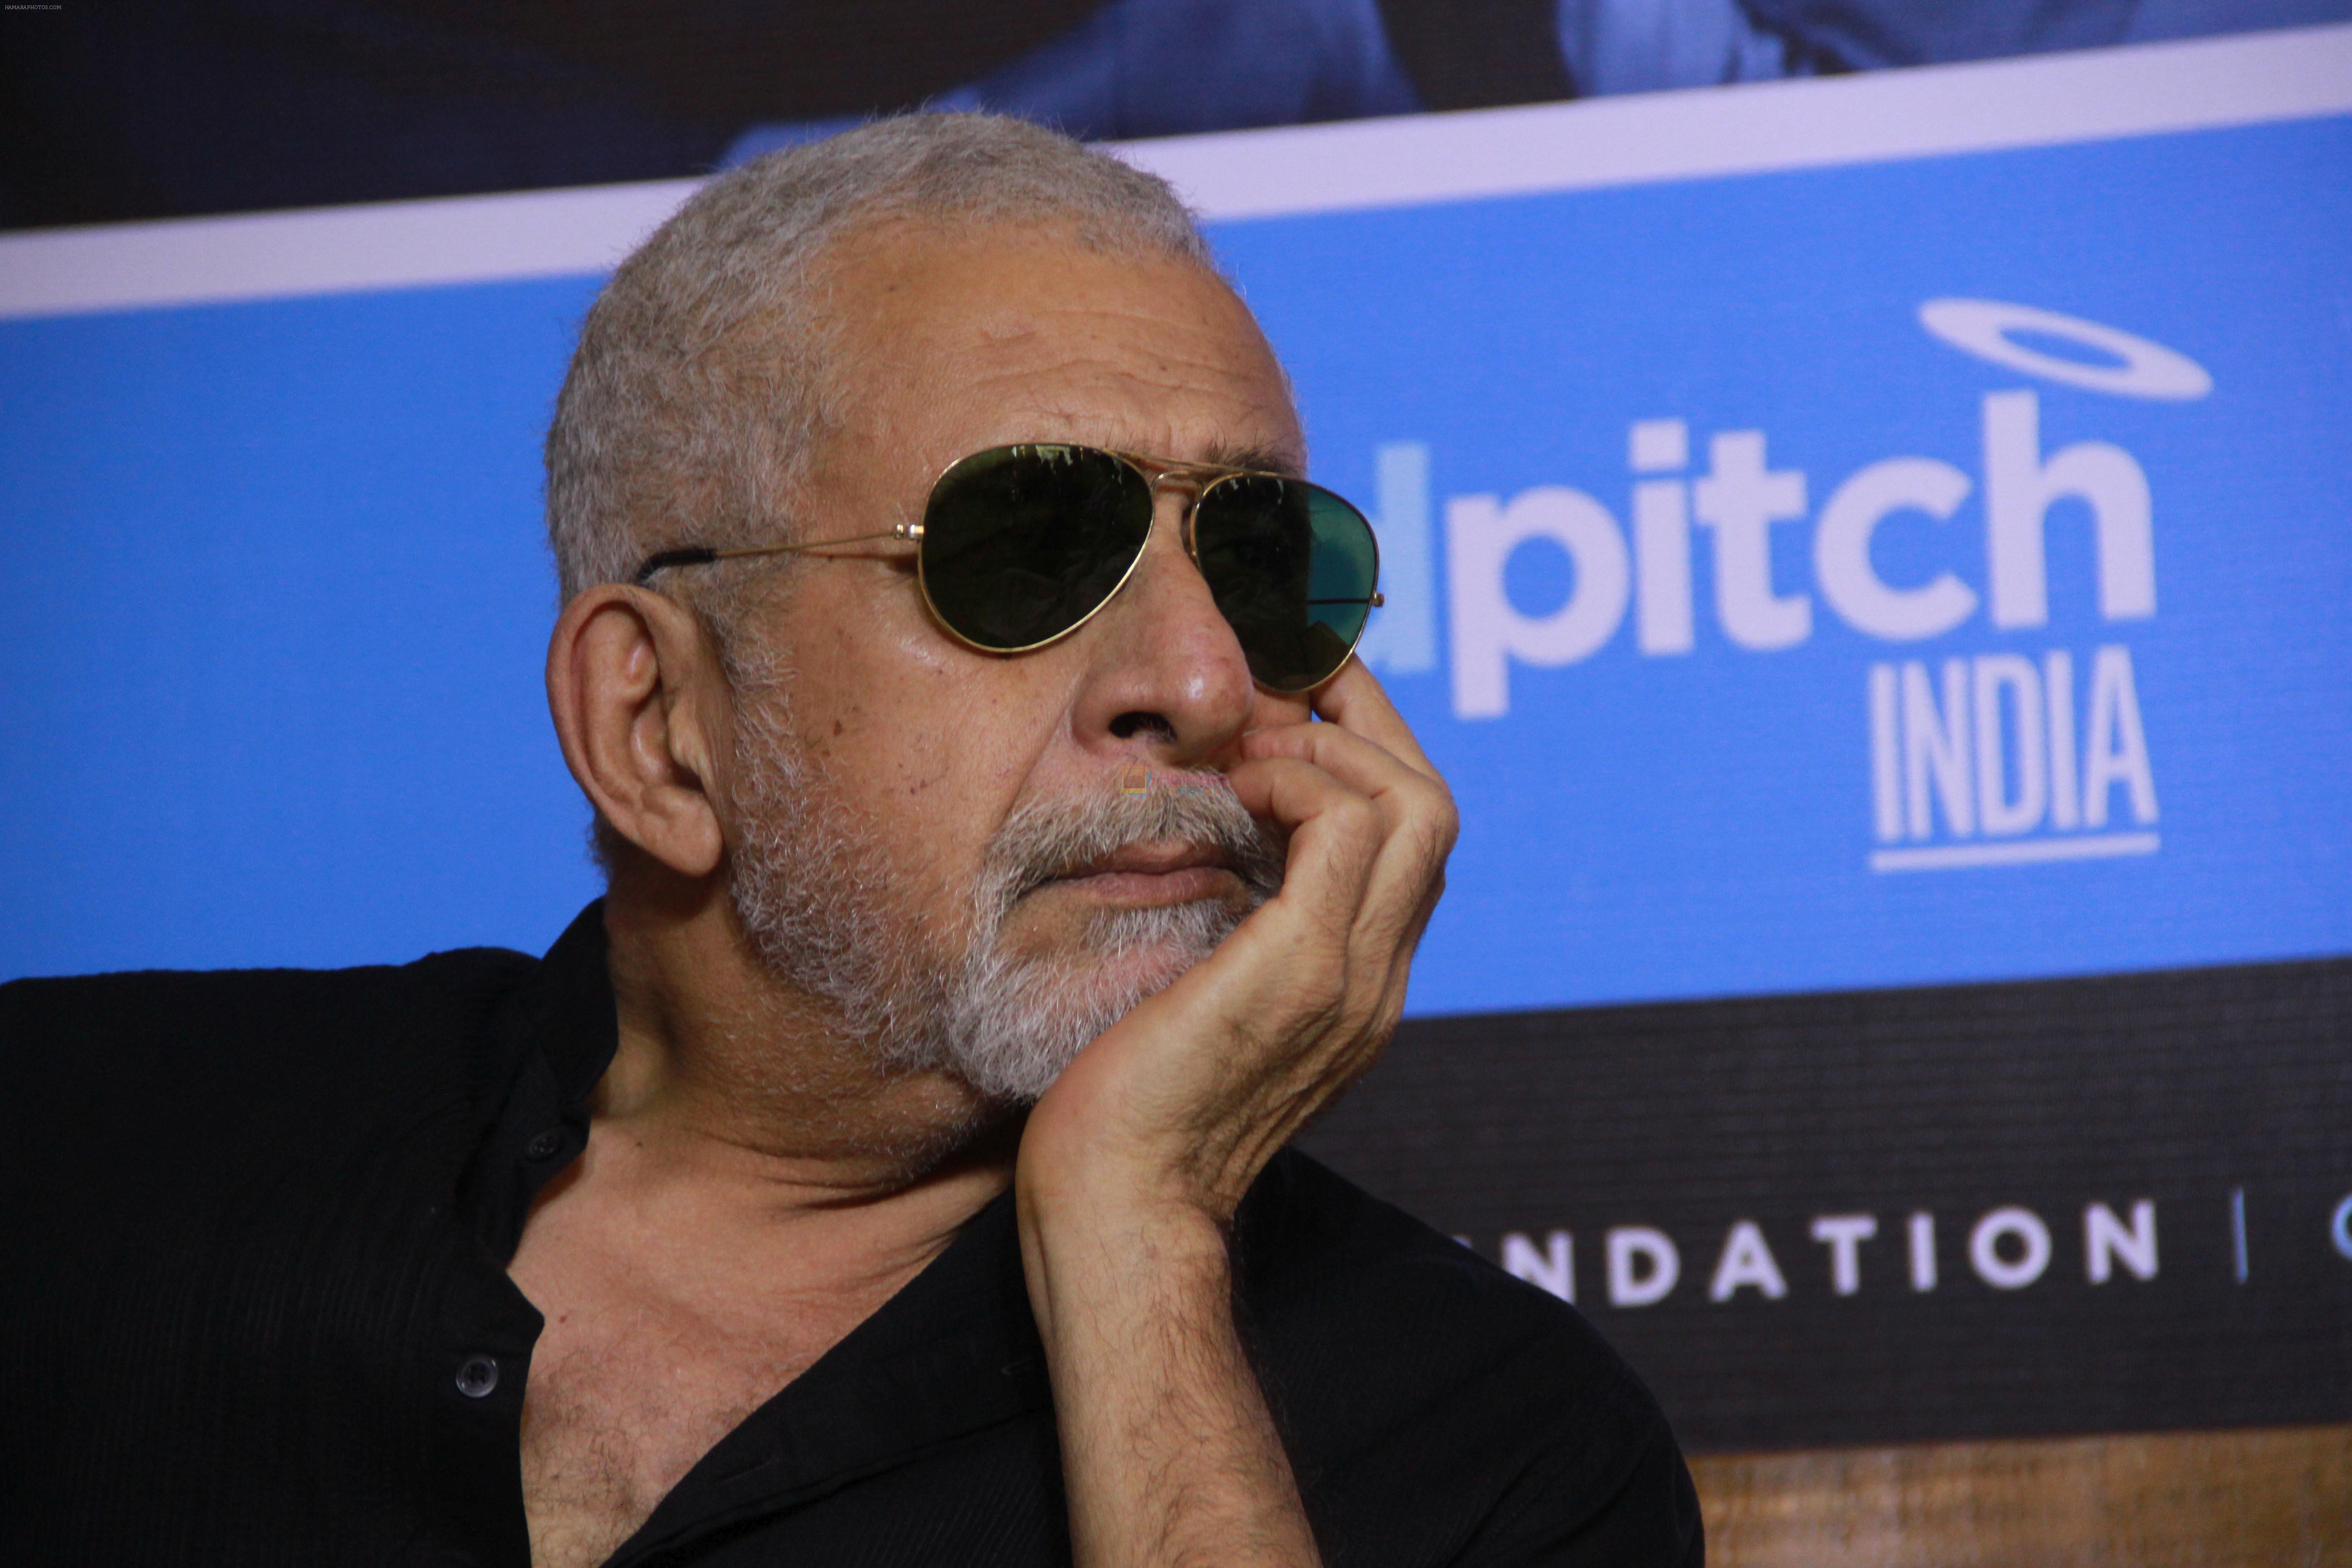 Naseeruddin Shah at the Press announcement for Good Pitch for films on 14th March 2018